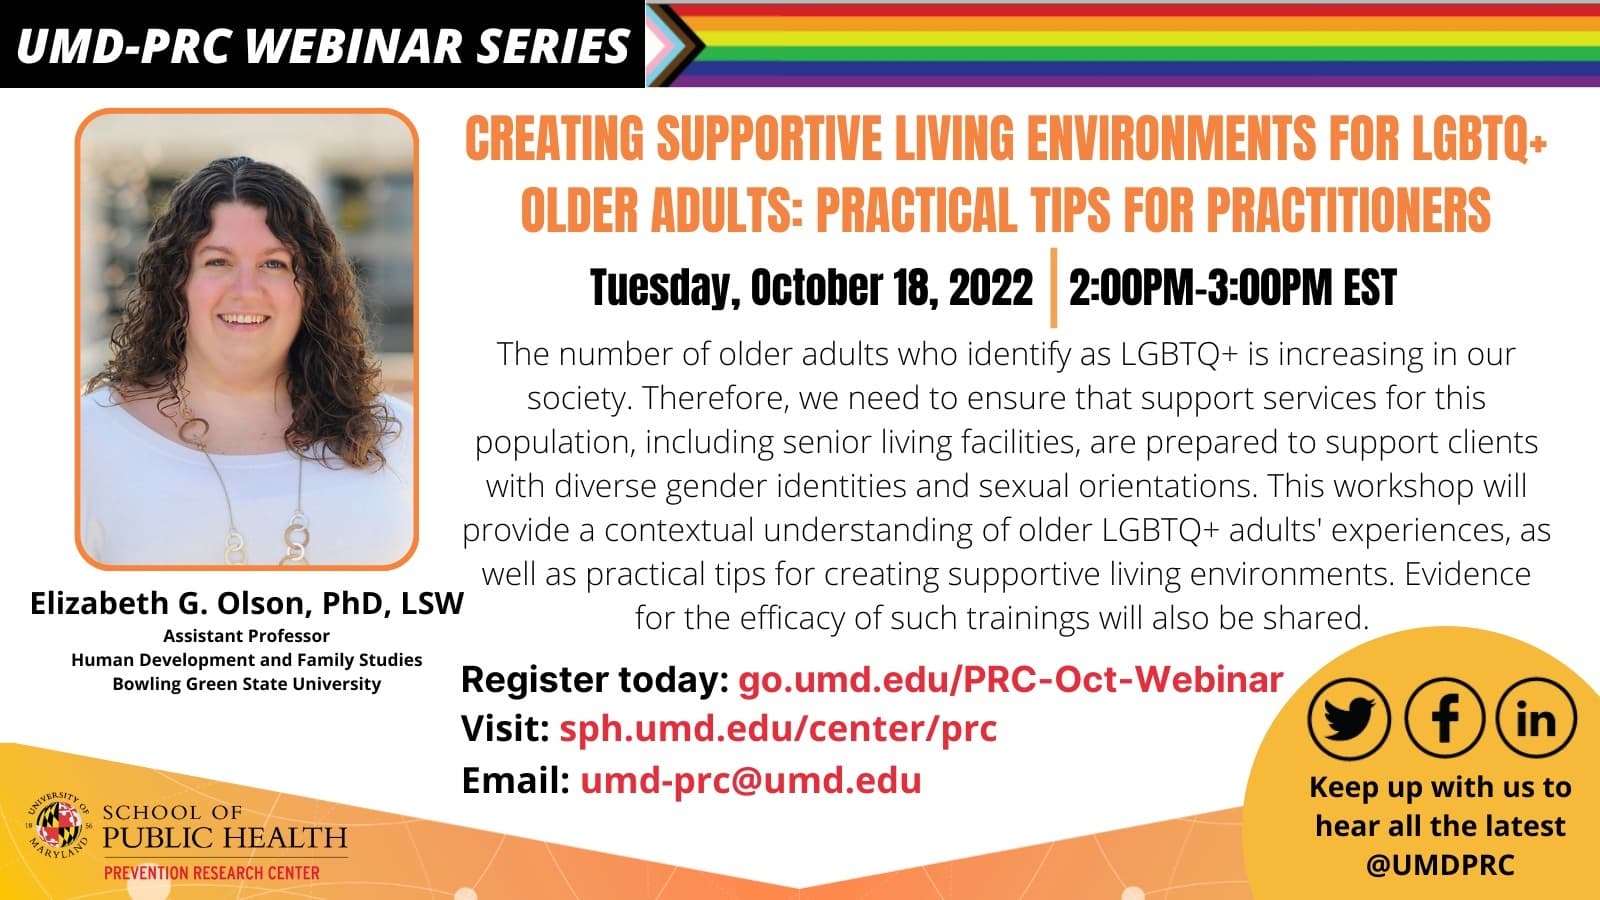 Branded Event Image for UMD-PRC Webinar: Creating Supportive Living Environments for LGBTQ+ Older Adults: Practical Tips for Practitioners with photo of Dr. Elizabeth Olson